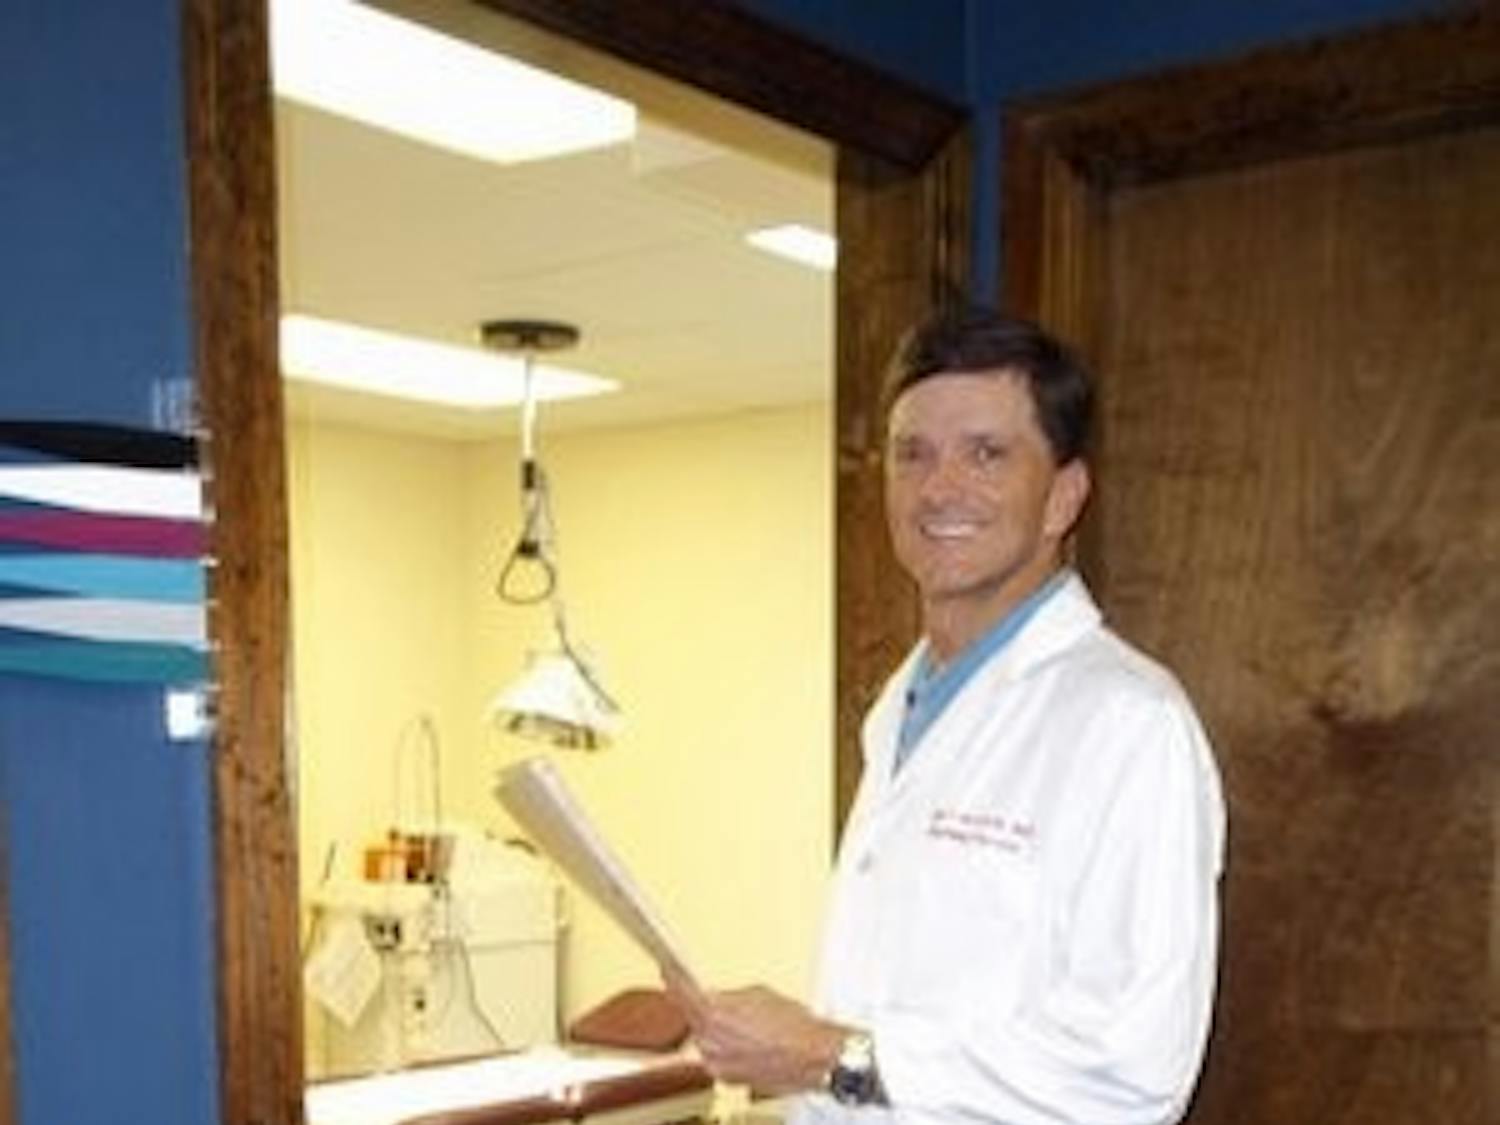 Robert Calcote, a dermatologist in Auburn, is offering free skin cancer screenings starting Feb. 29. Calcote said the incidence of melanoma is increasing significantly. (CONTRIBUTED)